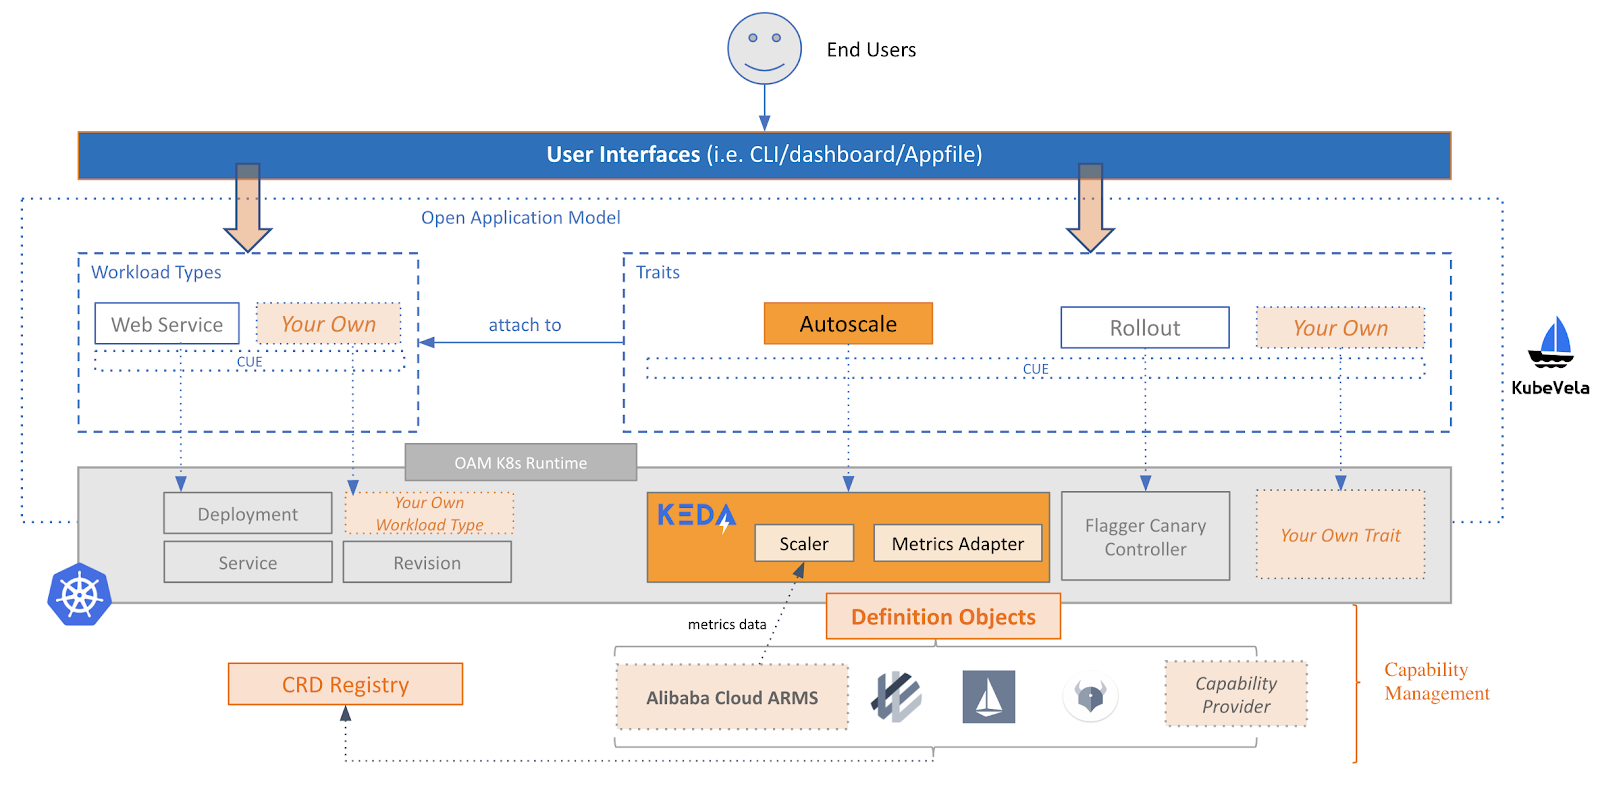 Why Alibaba Cloud uses KEDA for application autoscaling